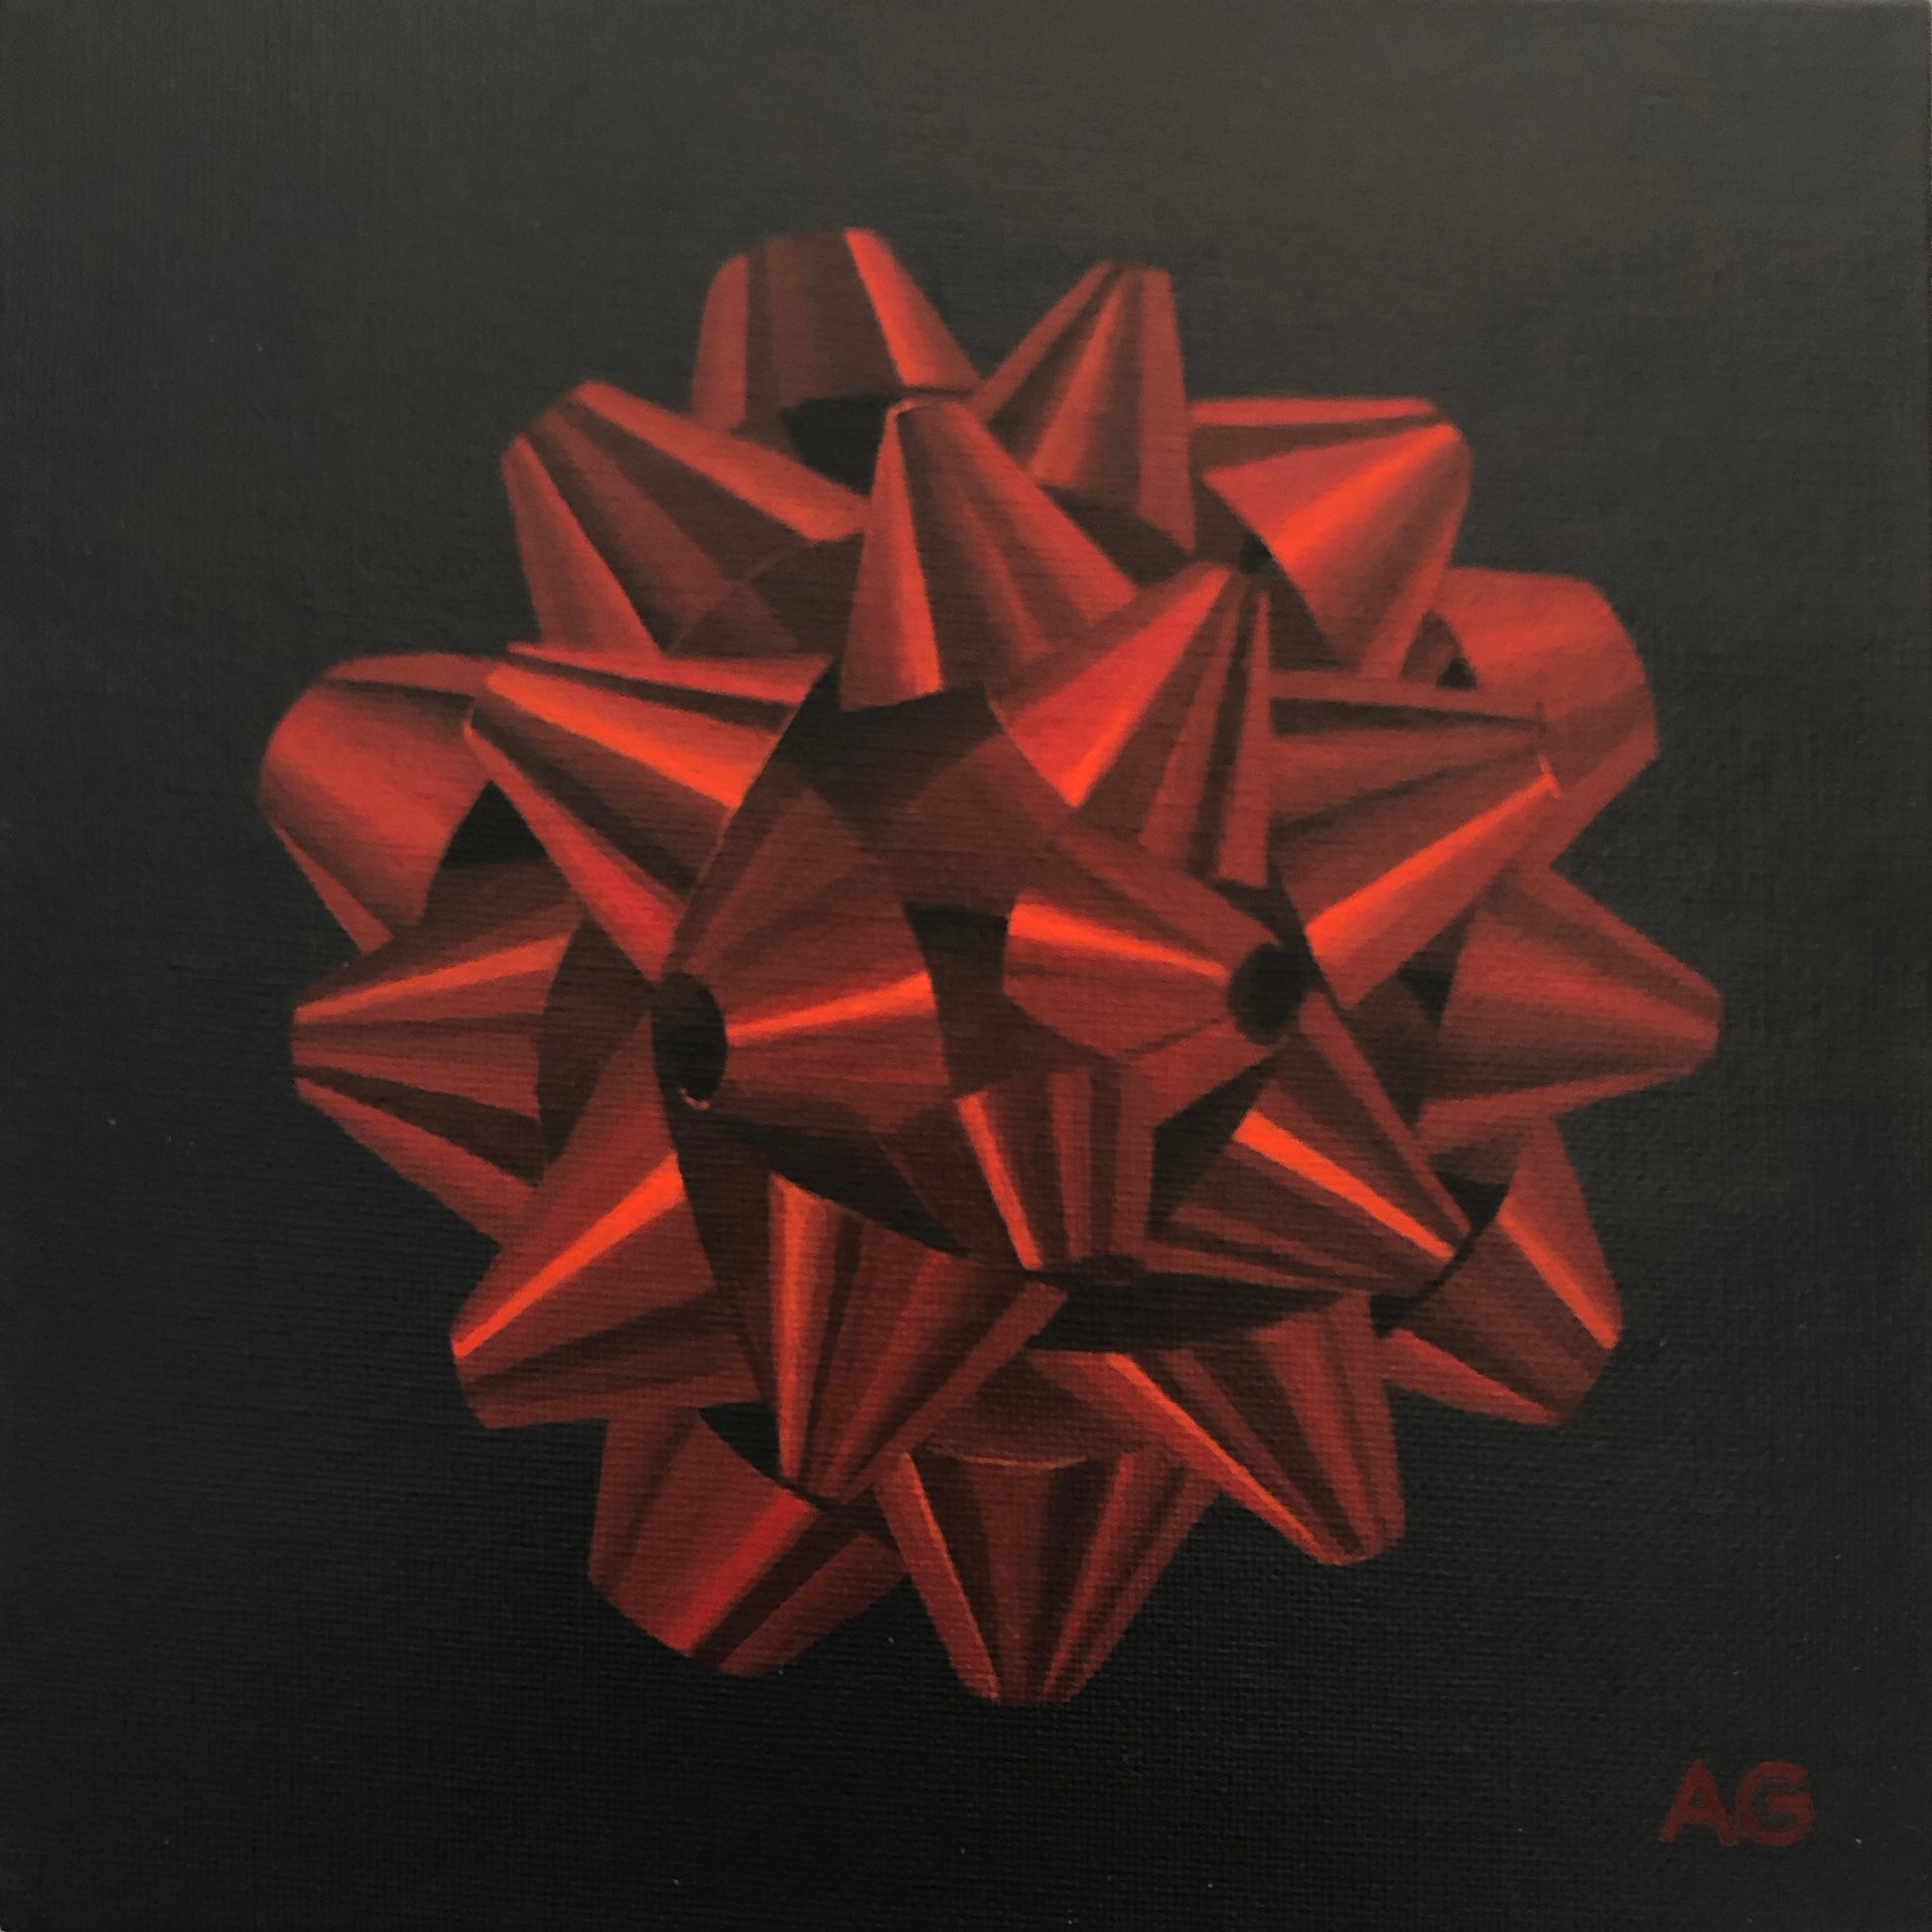 Red Gift Bow original acrylic on canvas panel painting by Amanda Gosse